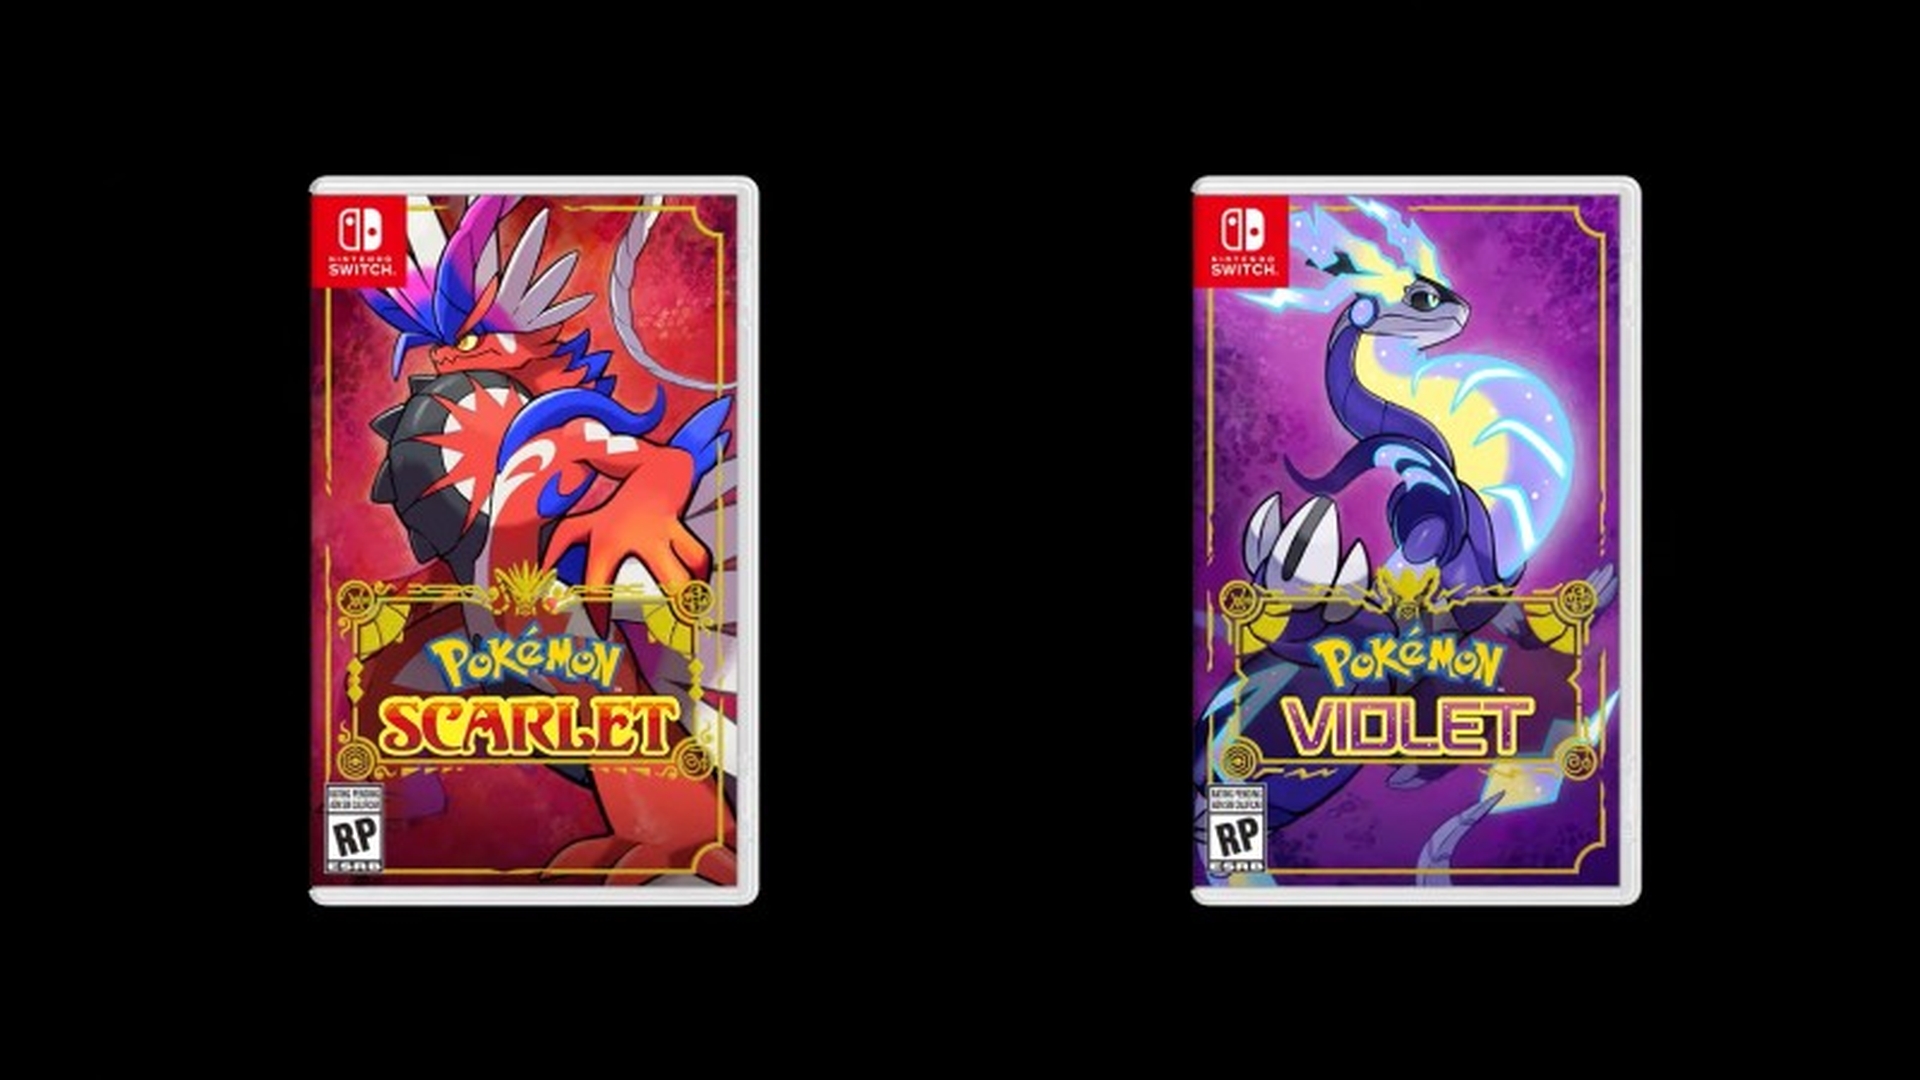 Today, we are going to be covering Pokemon Scarlet and Violet differences and will try to answer the question "Which is better Scarlet or Violet?"